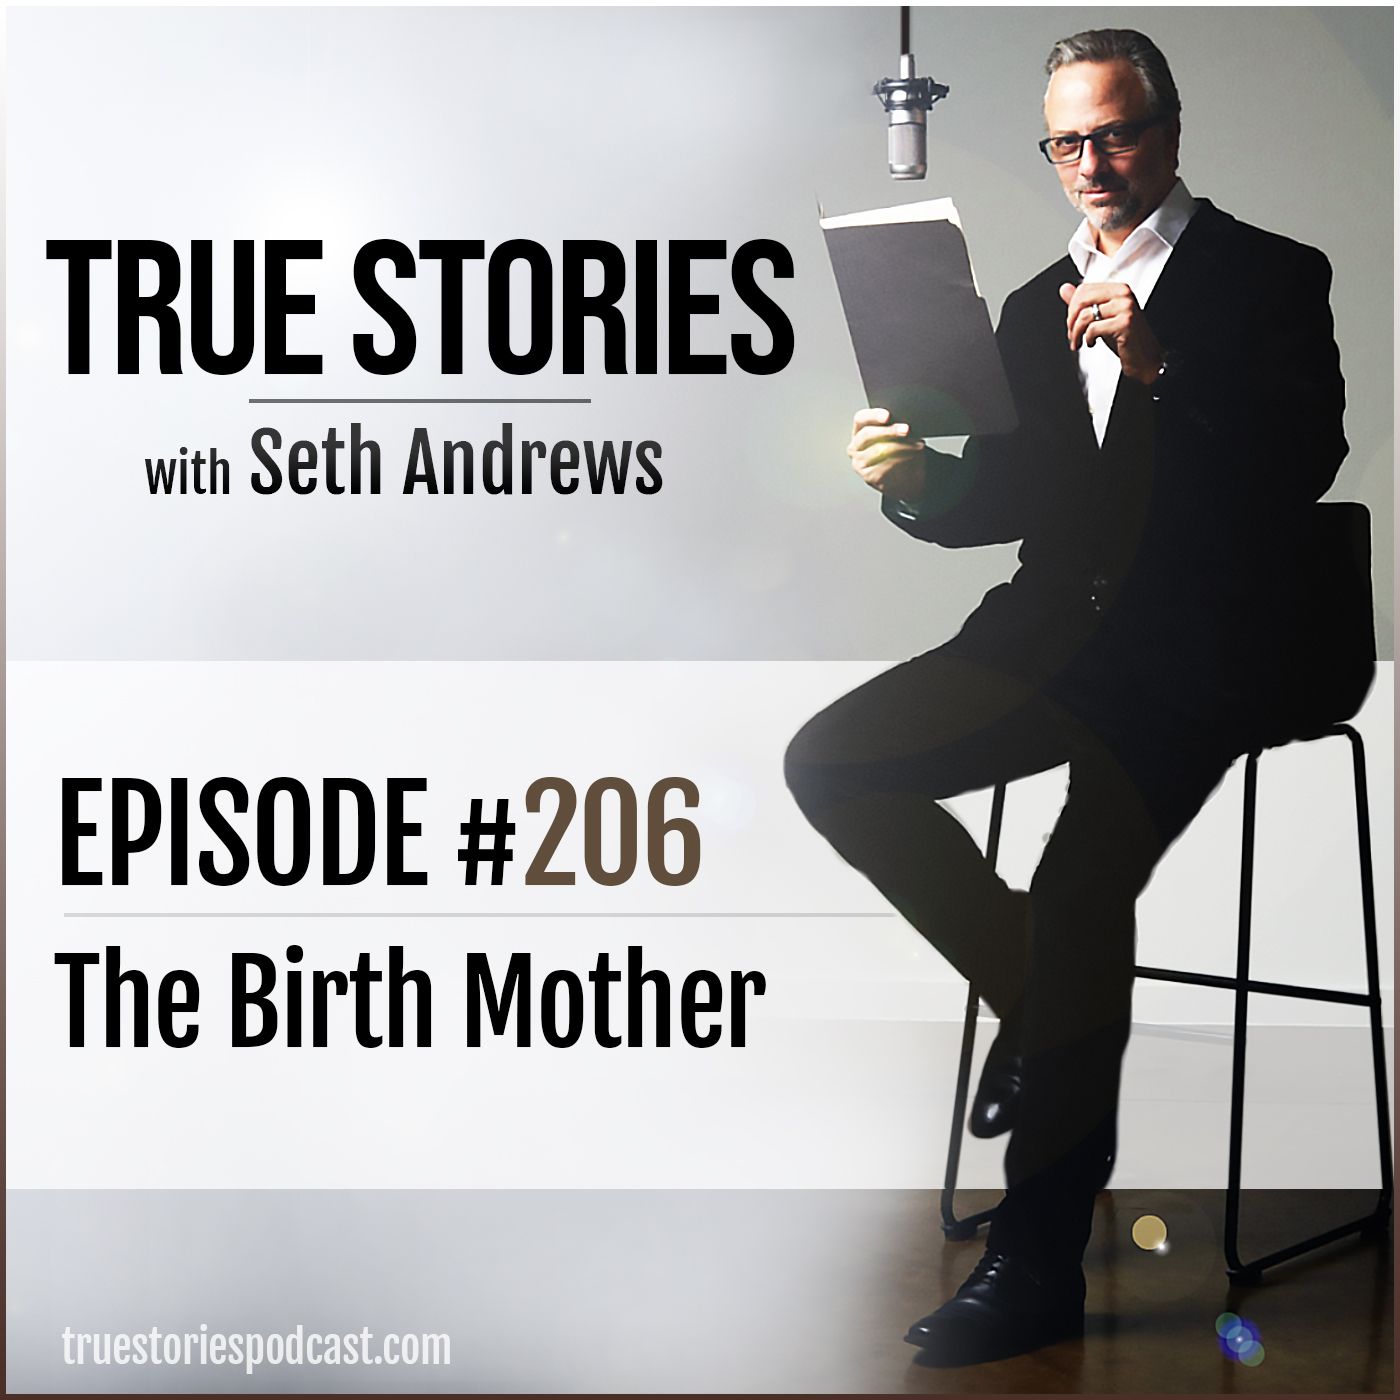 True Stories #207 - The Birth Mother